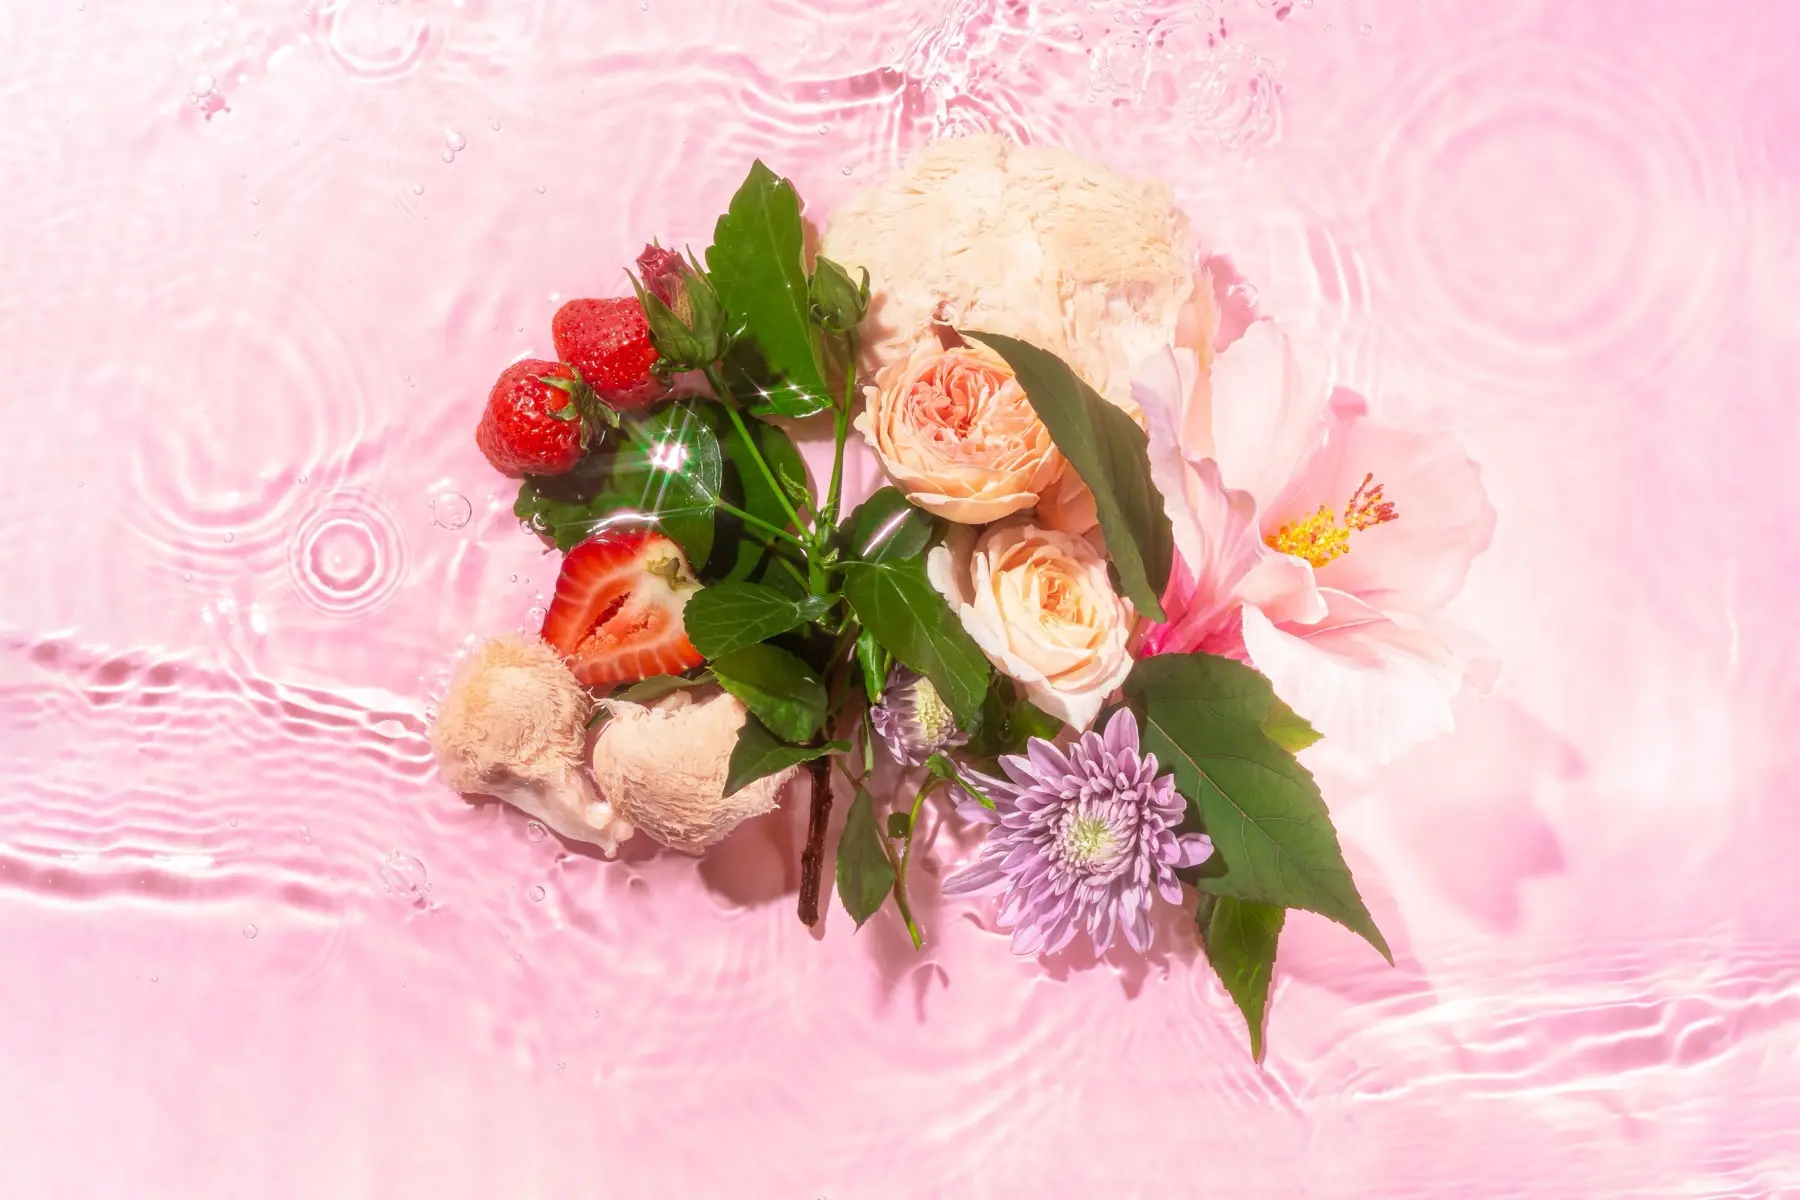 Image of red, pink, white, and purple flowers and strawberries on a pink background.